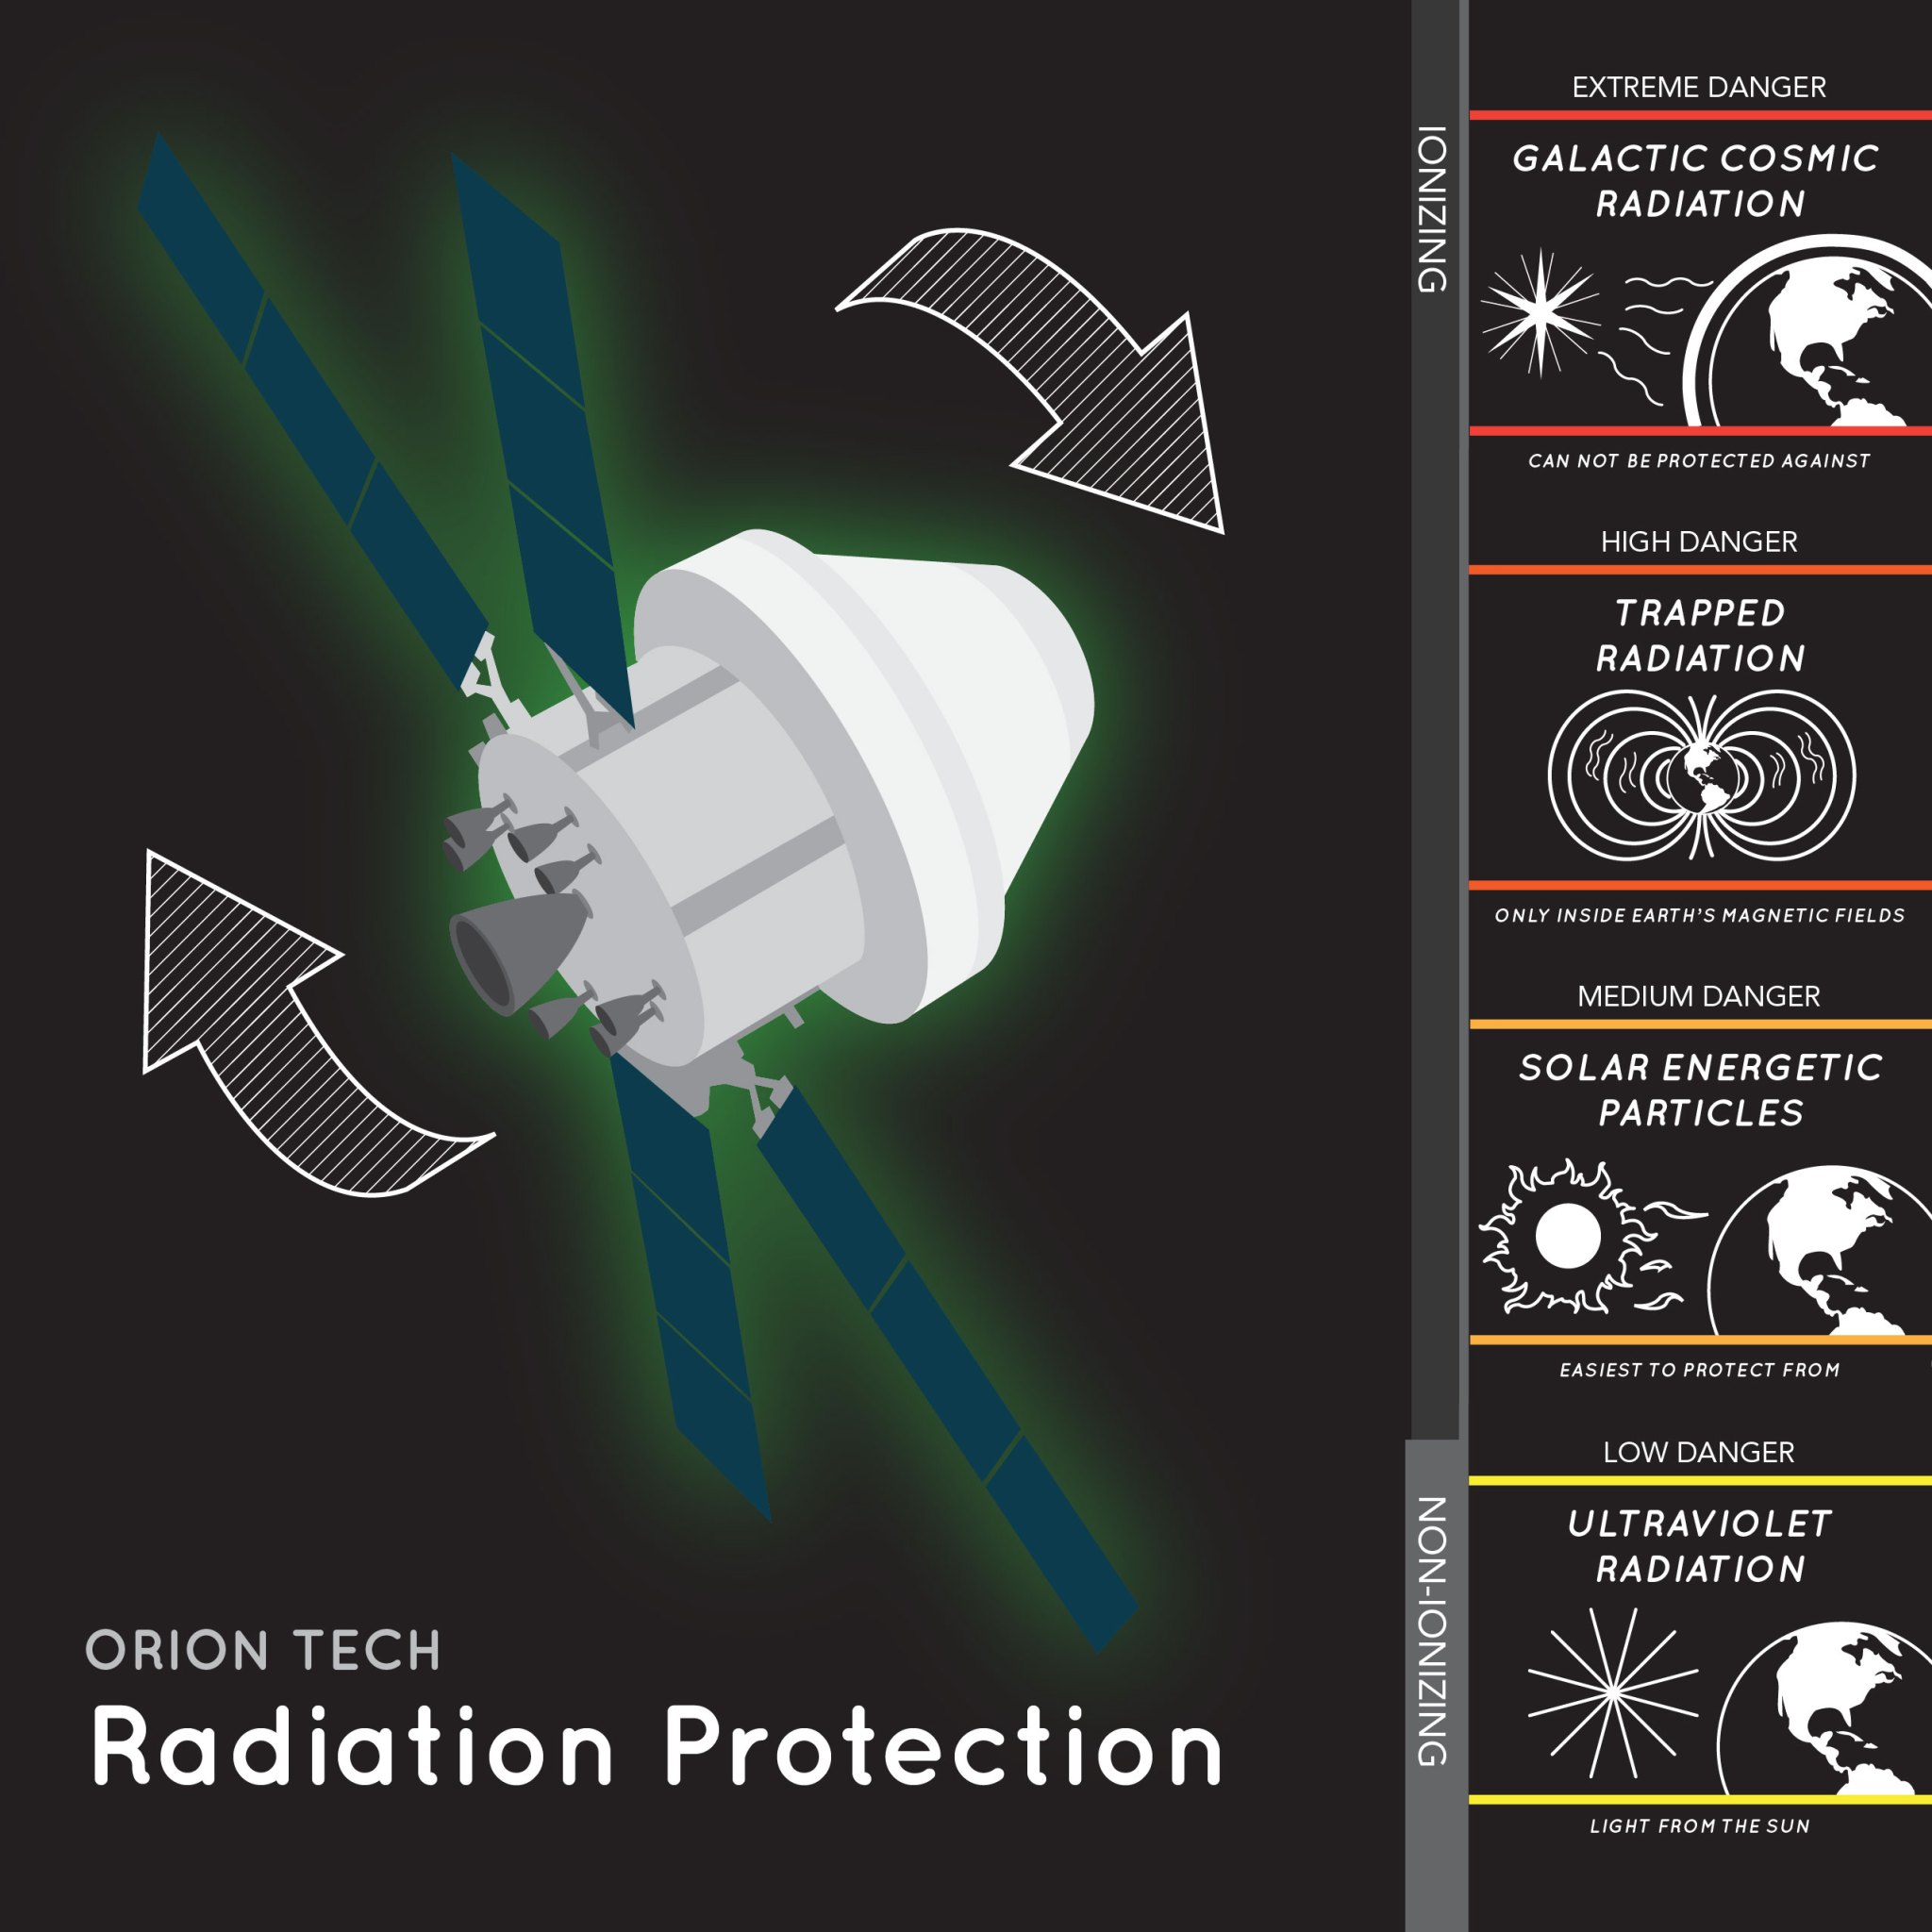 Orion Tech: Radiation Protection